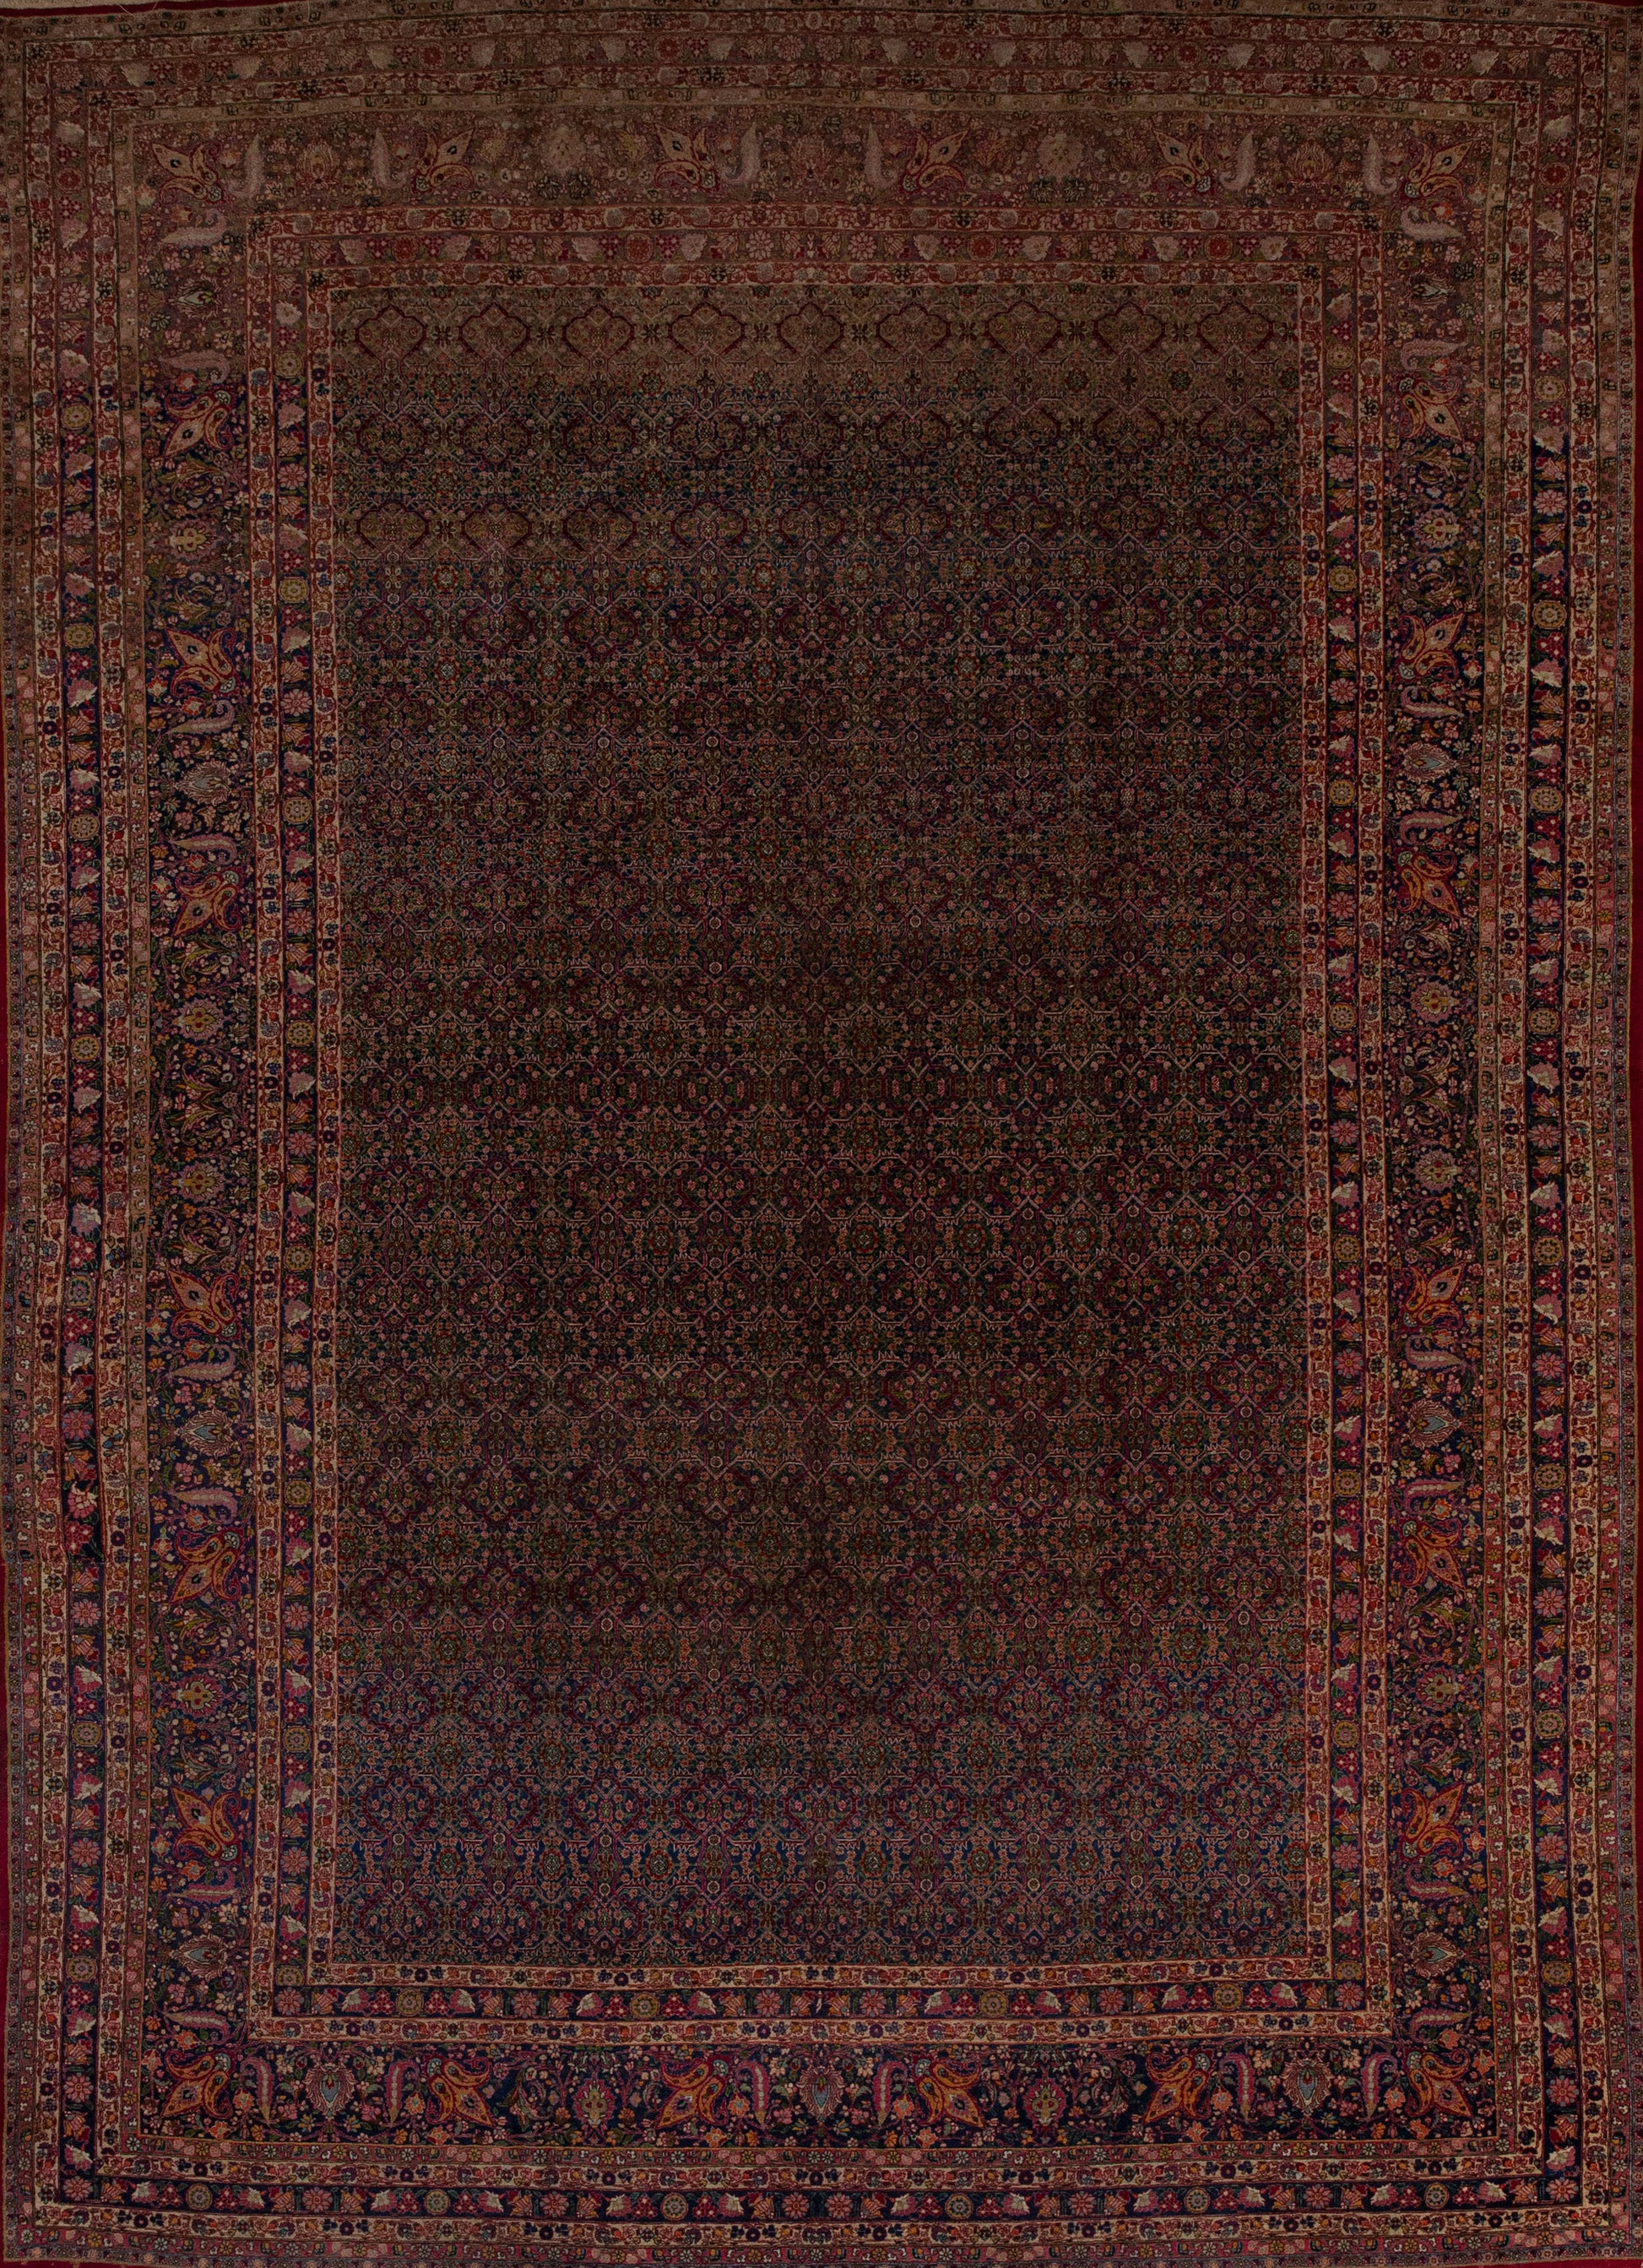 This ancient brown rug comes with a very detailed pattern which will amaze you. The amount of details displayed on this rug projects the hard work coming from artisans' hands.